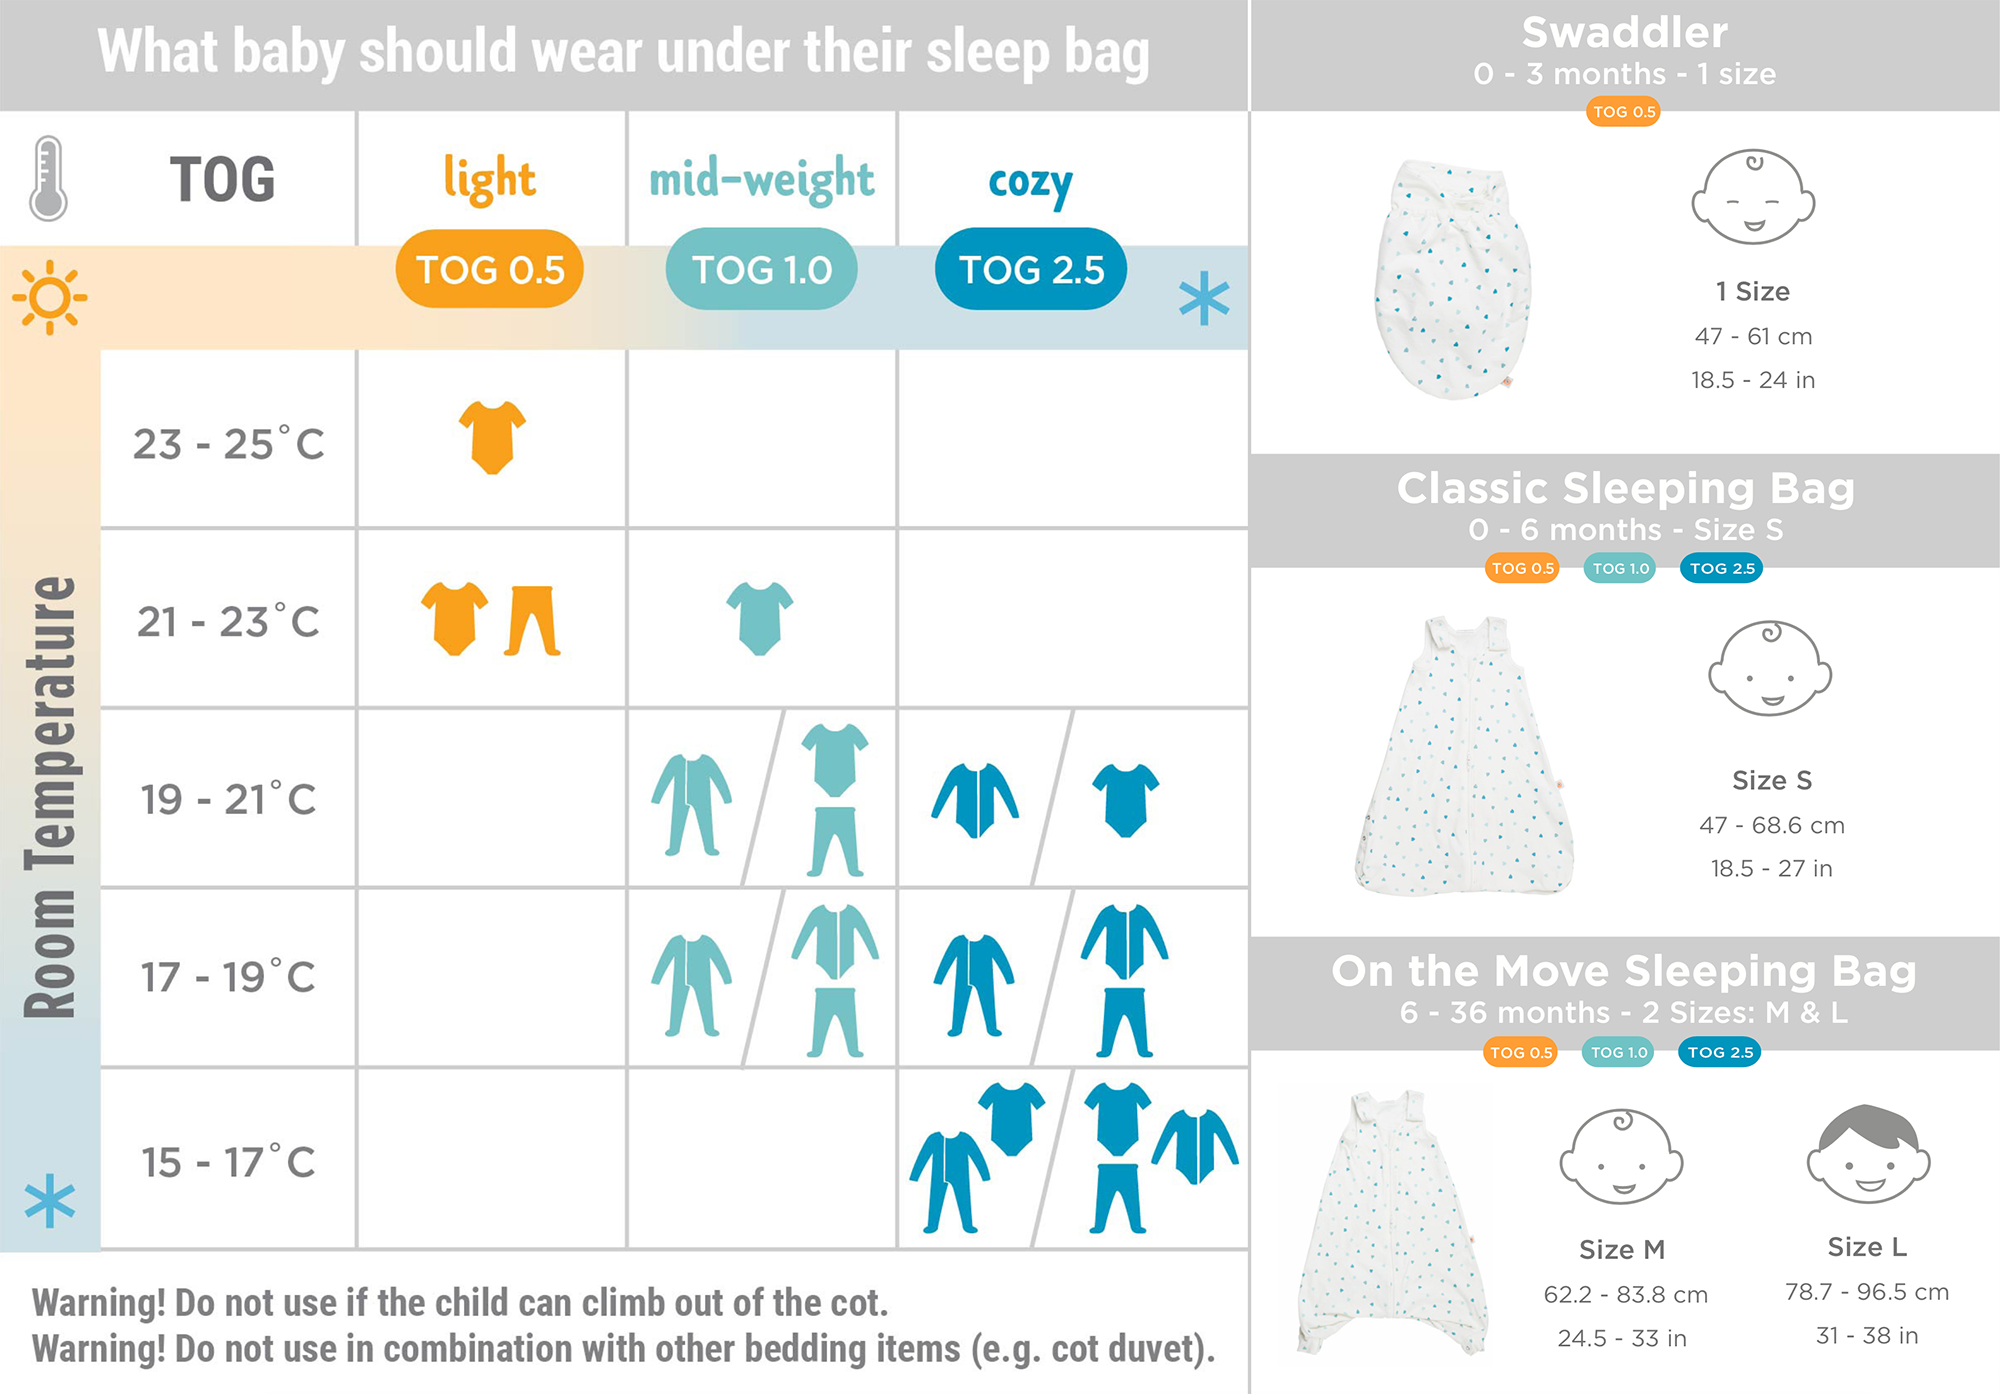 How to dress a baby for sleep, understanding the TOG rating